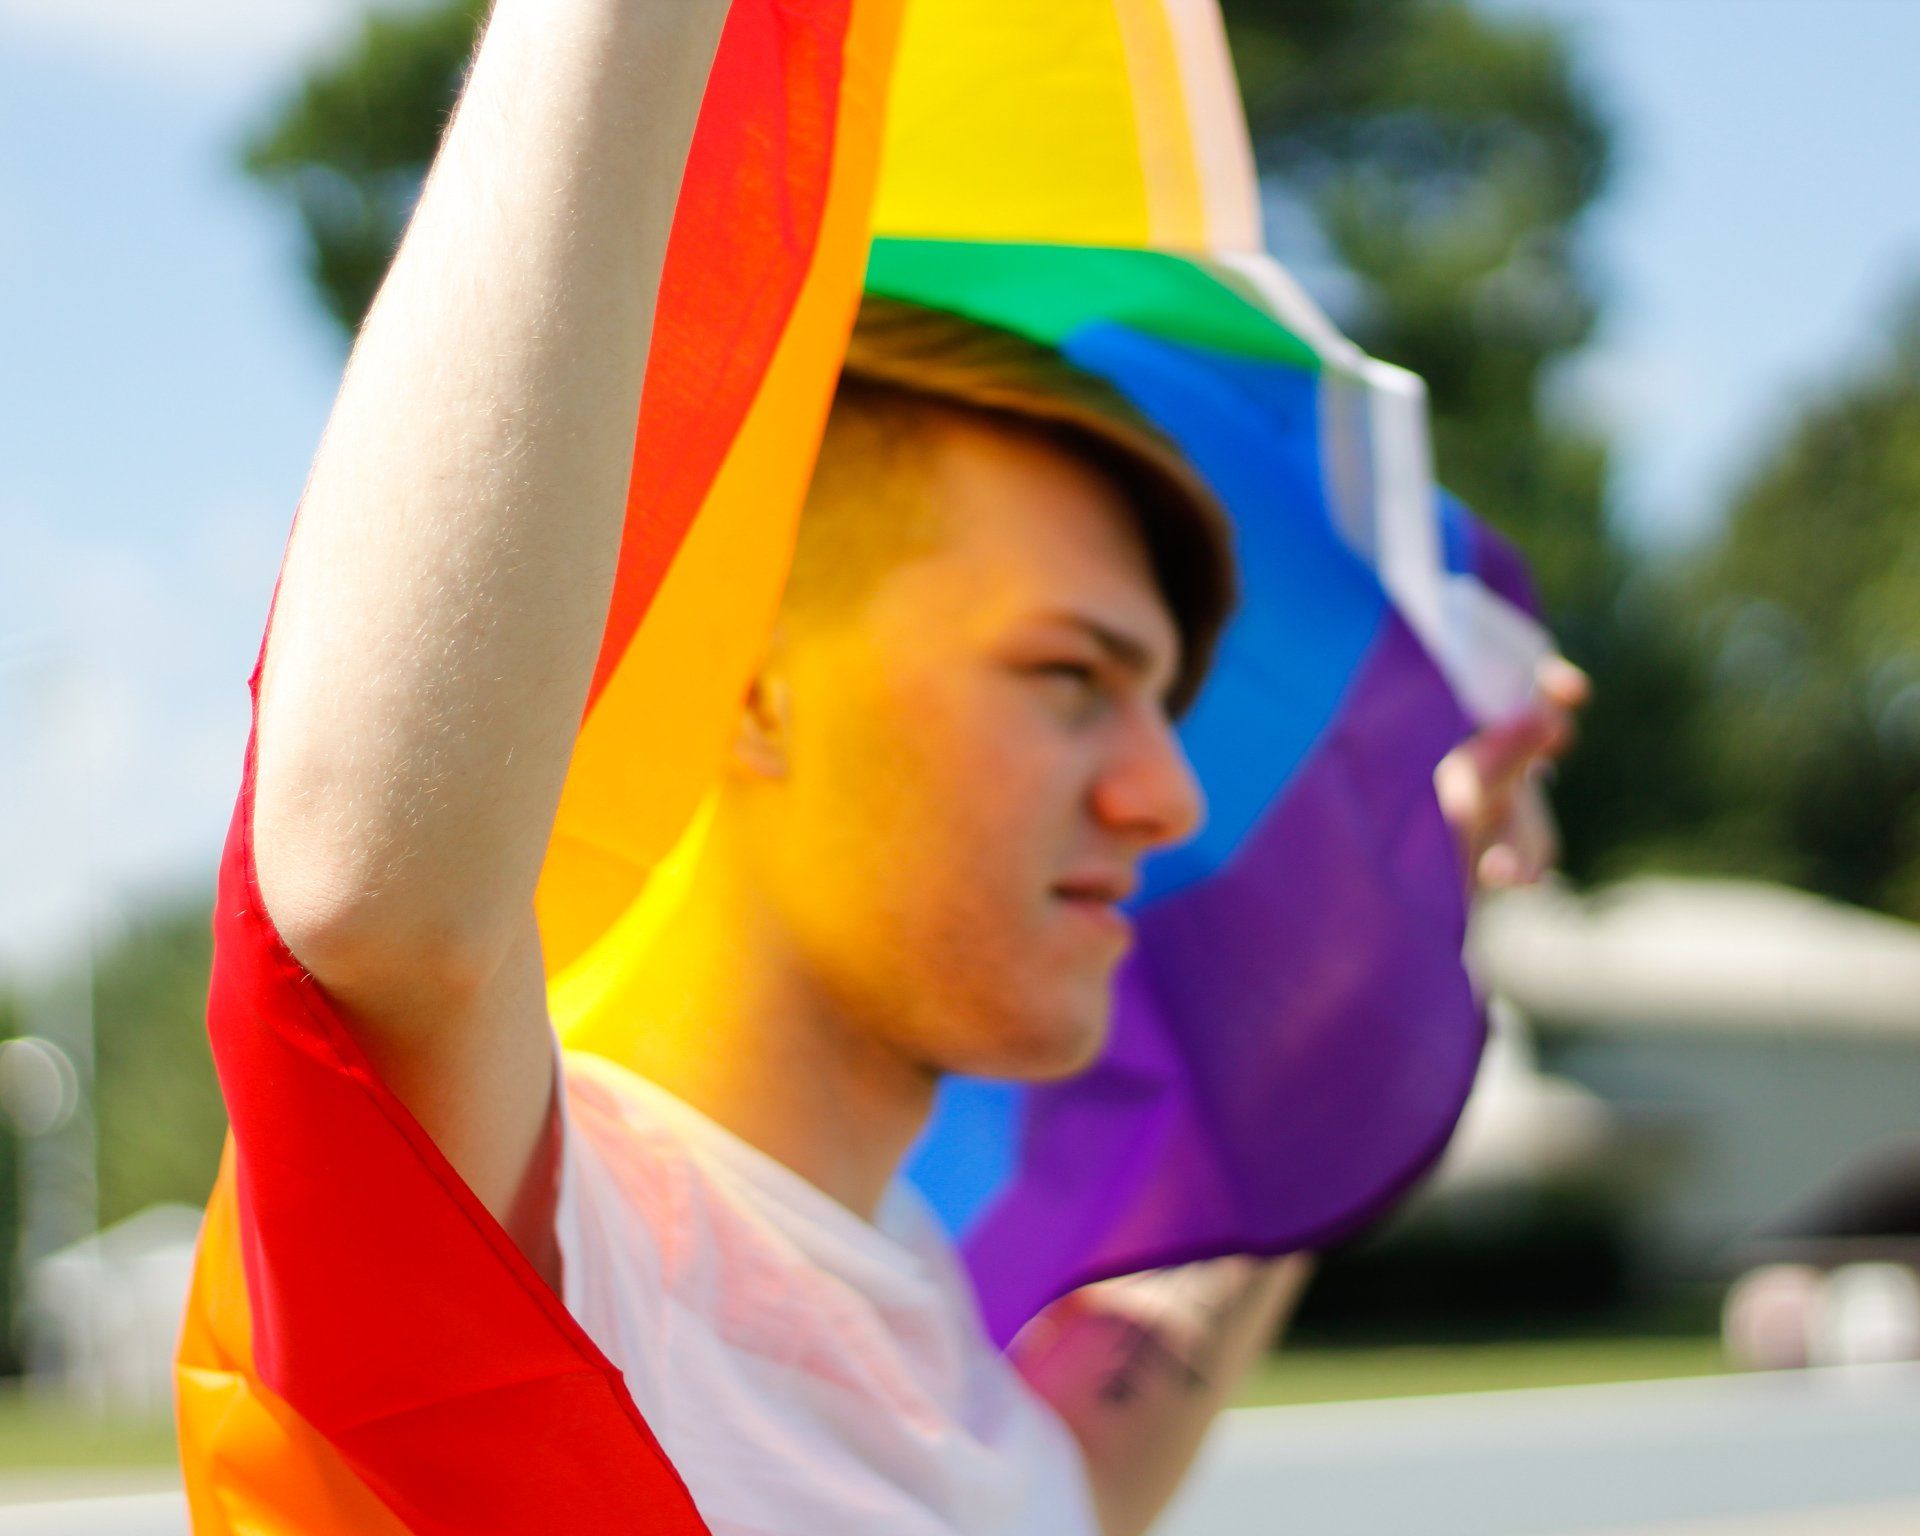 A young man is holding a rainbow flag over his head